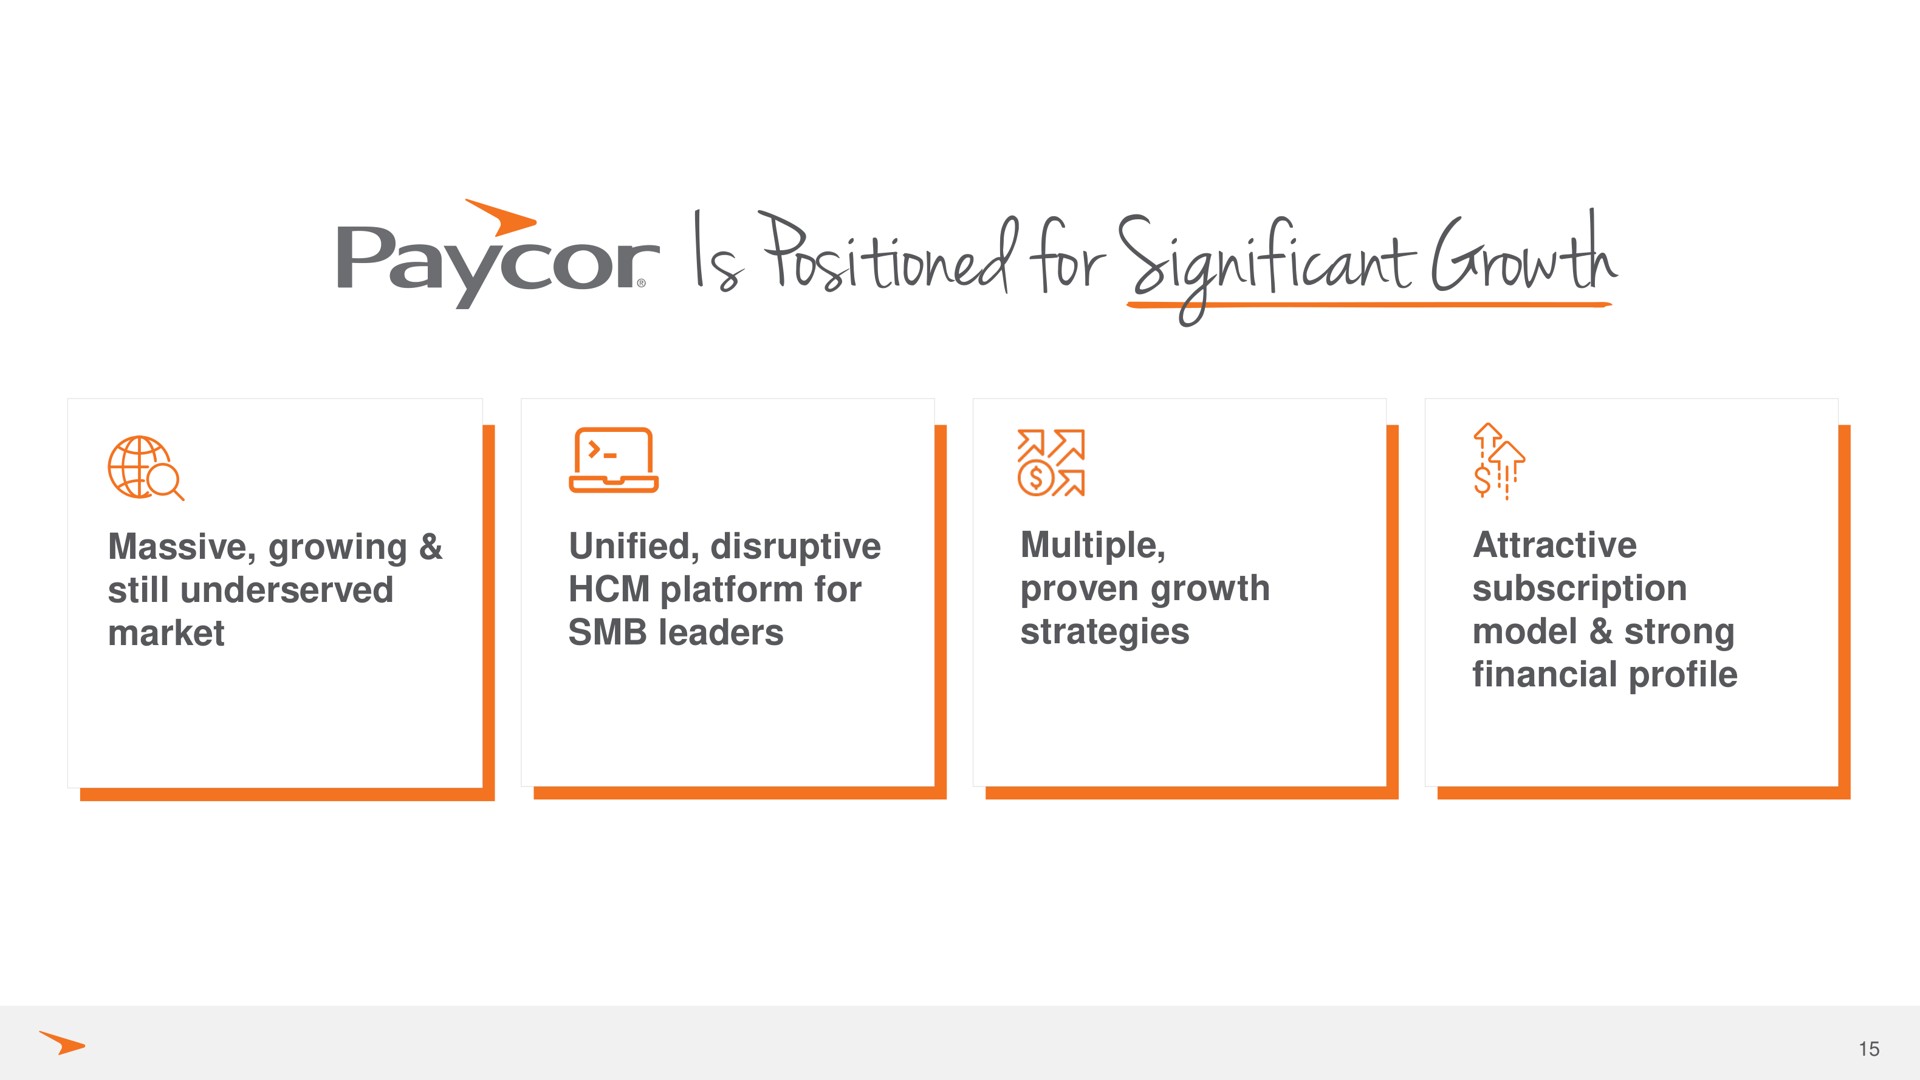 is positioned for significant growth | Paycor